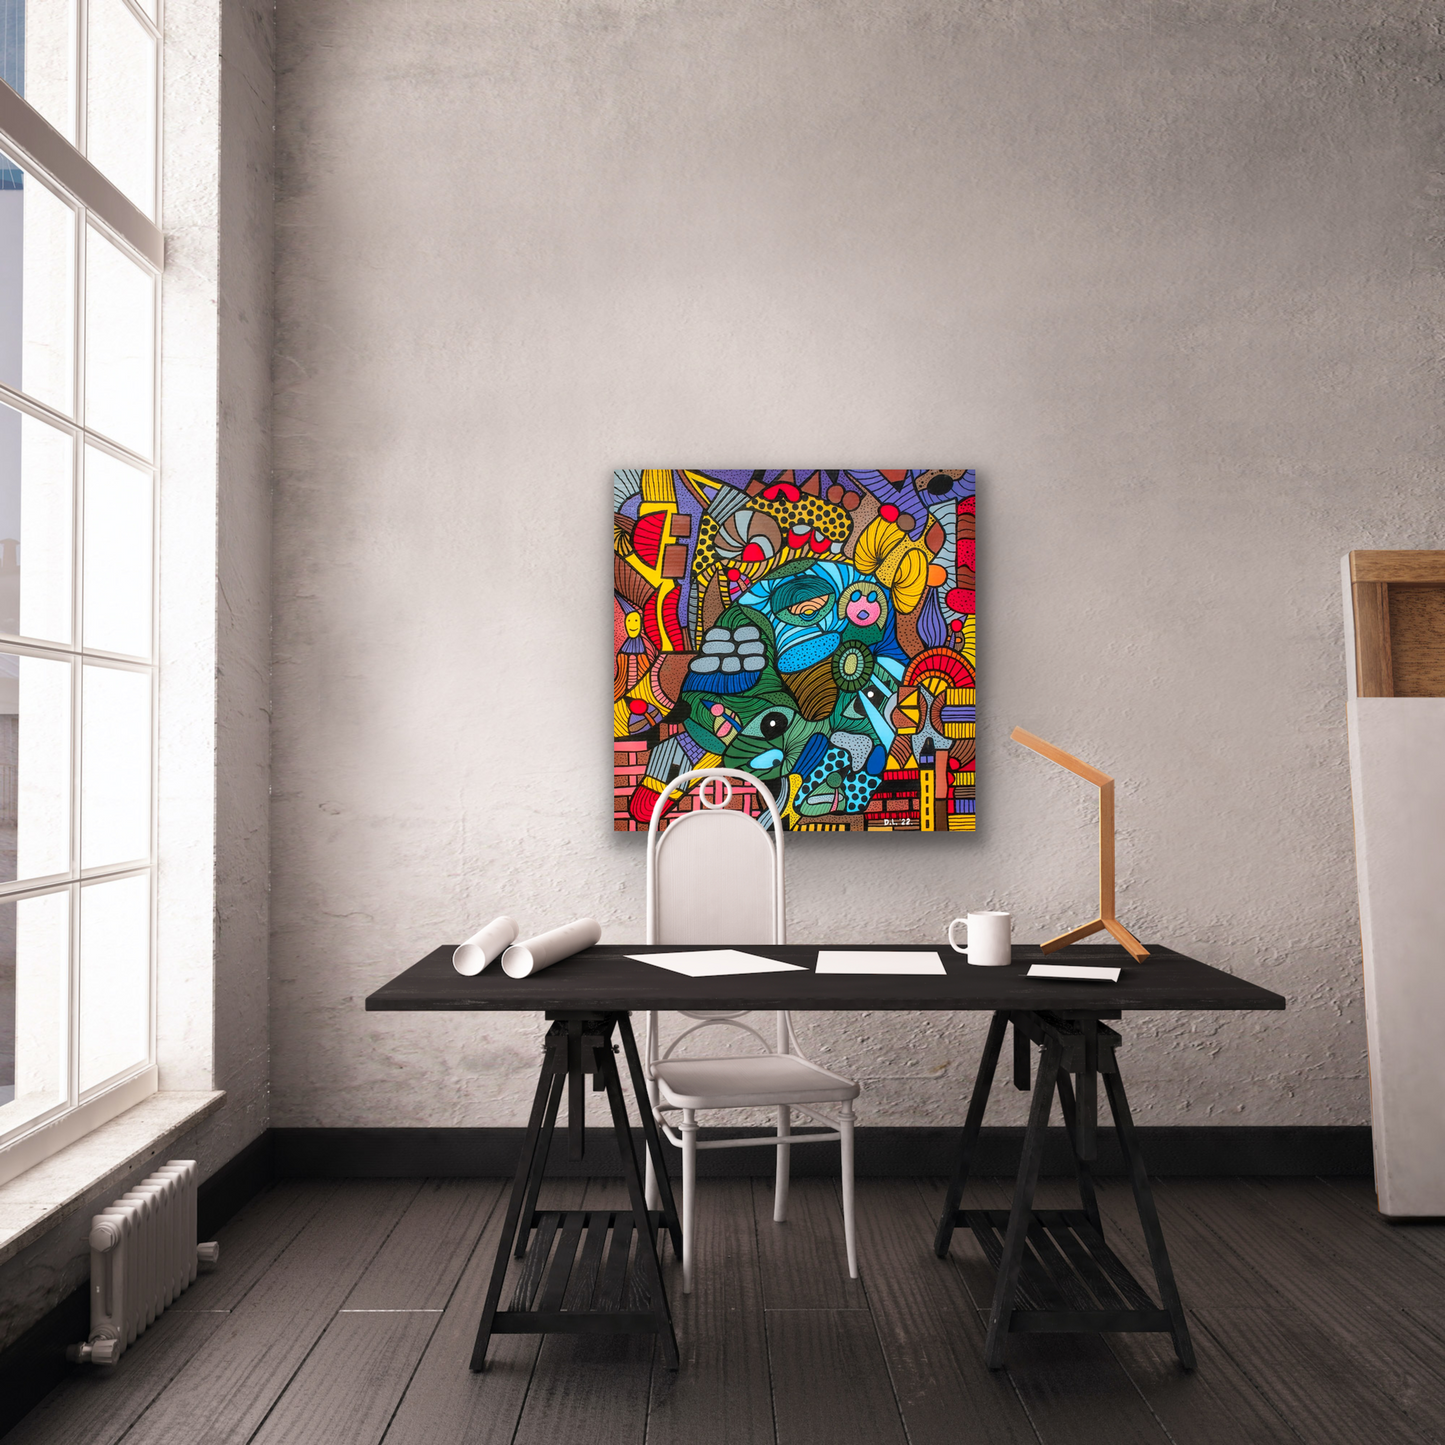 This artwork comes in five different sizes to fit your wall perfectly.